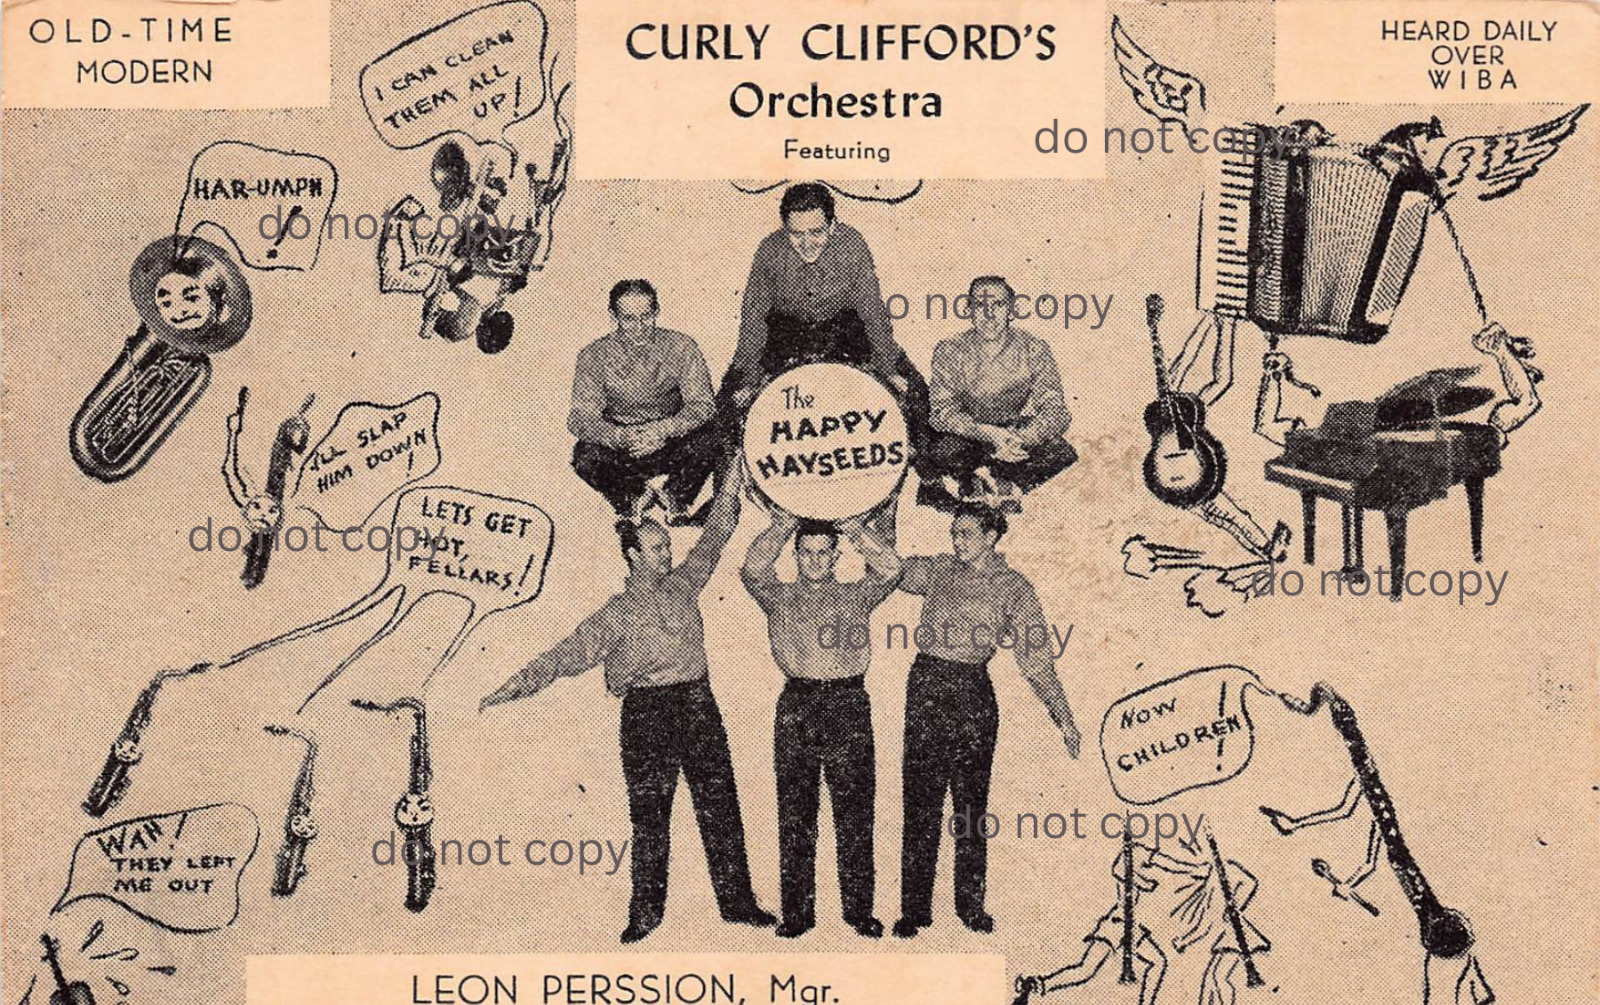 The Happy Hayseeds Curly Clifford\'s Orchestra WIBA Radio Station Vtg Postcard A7